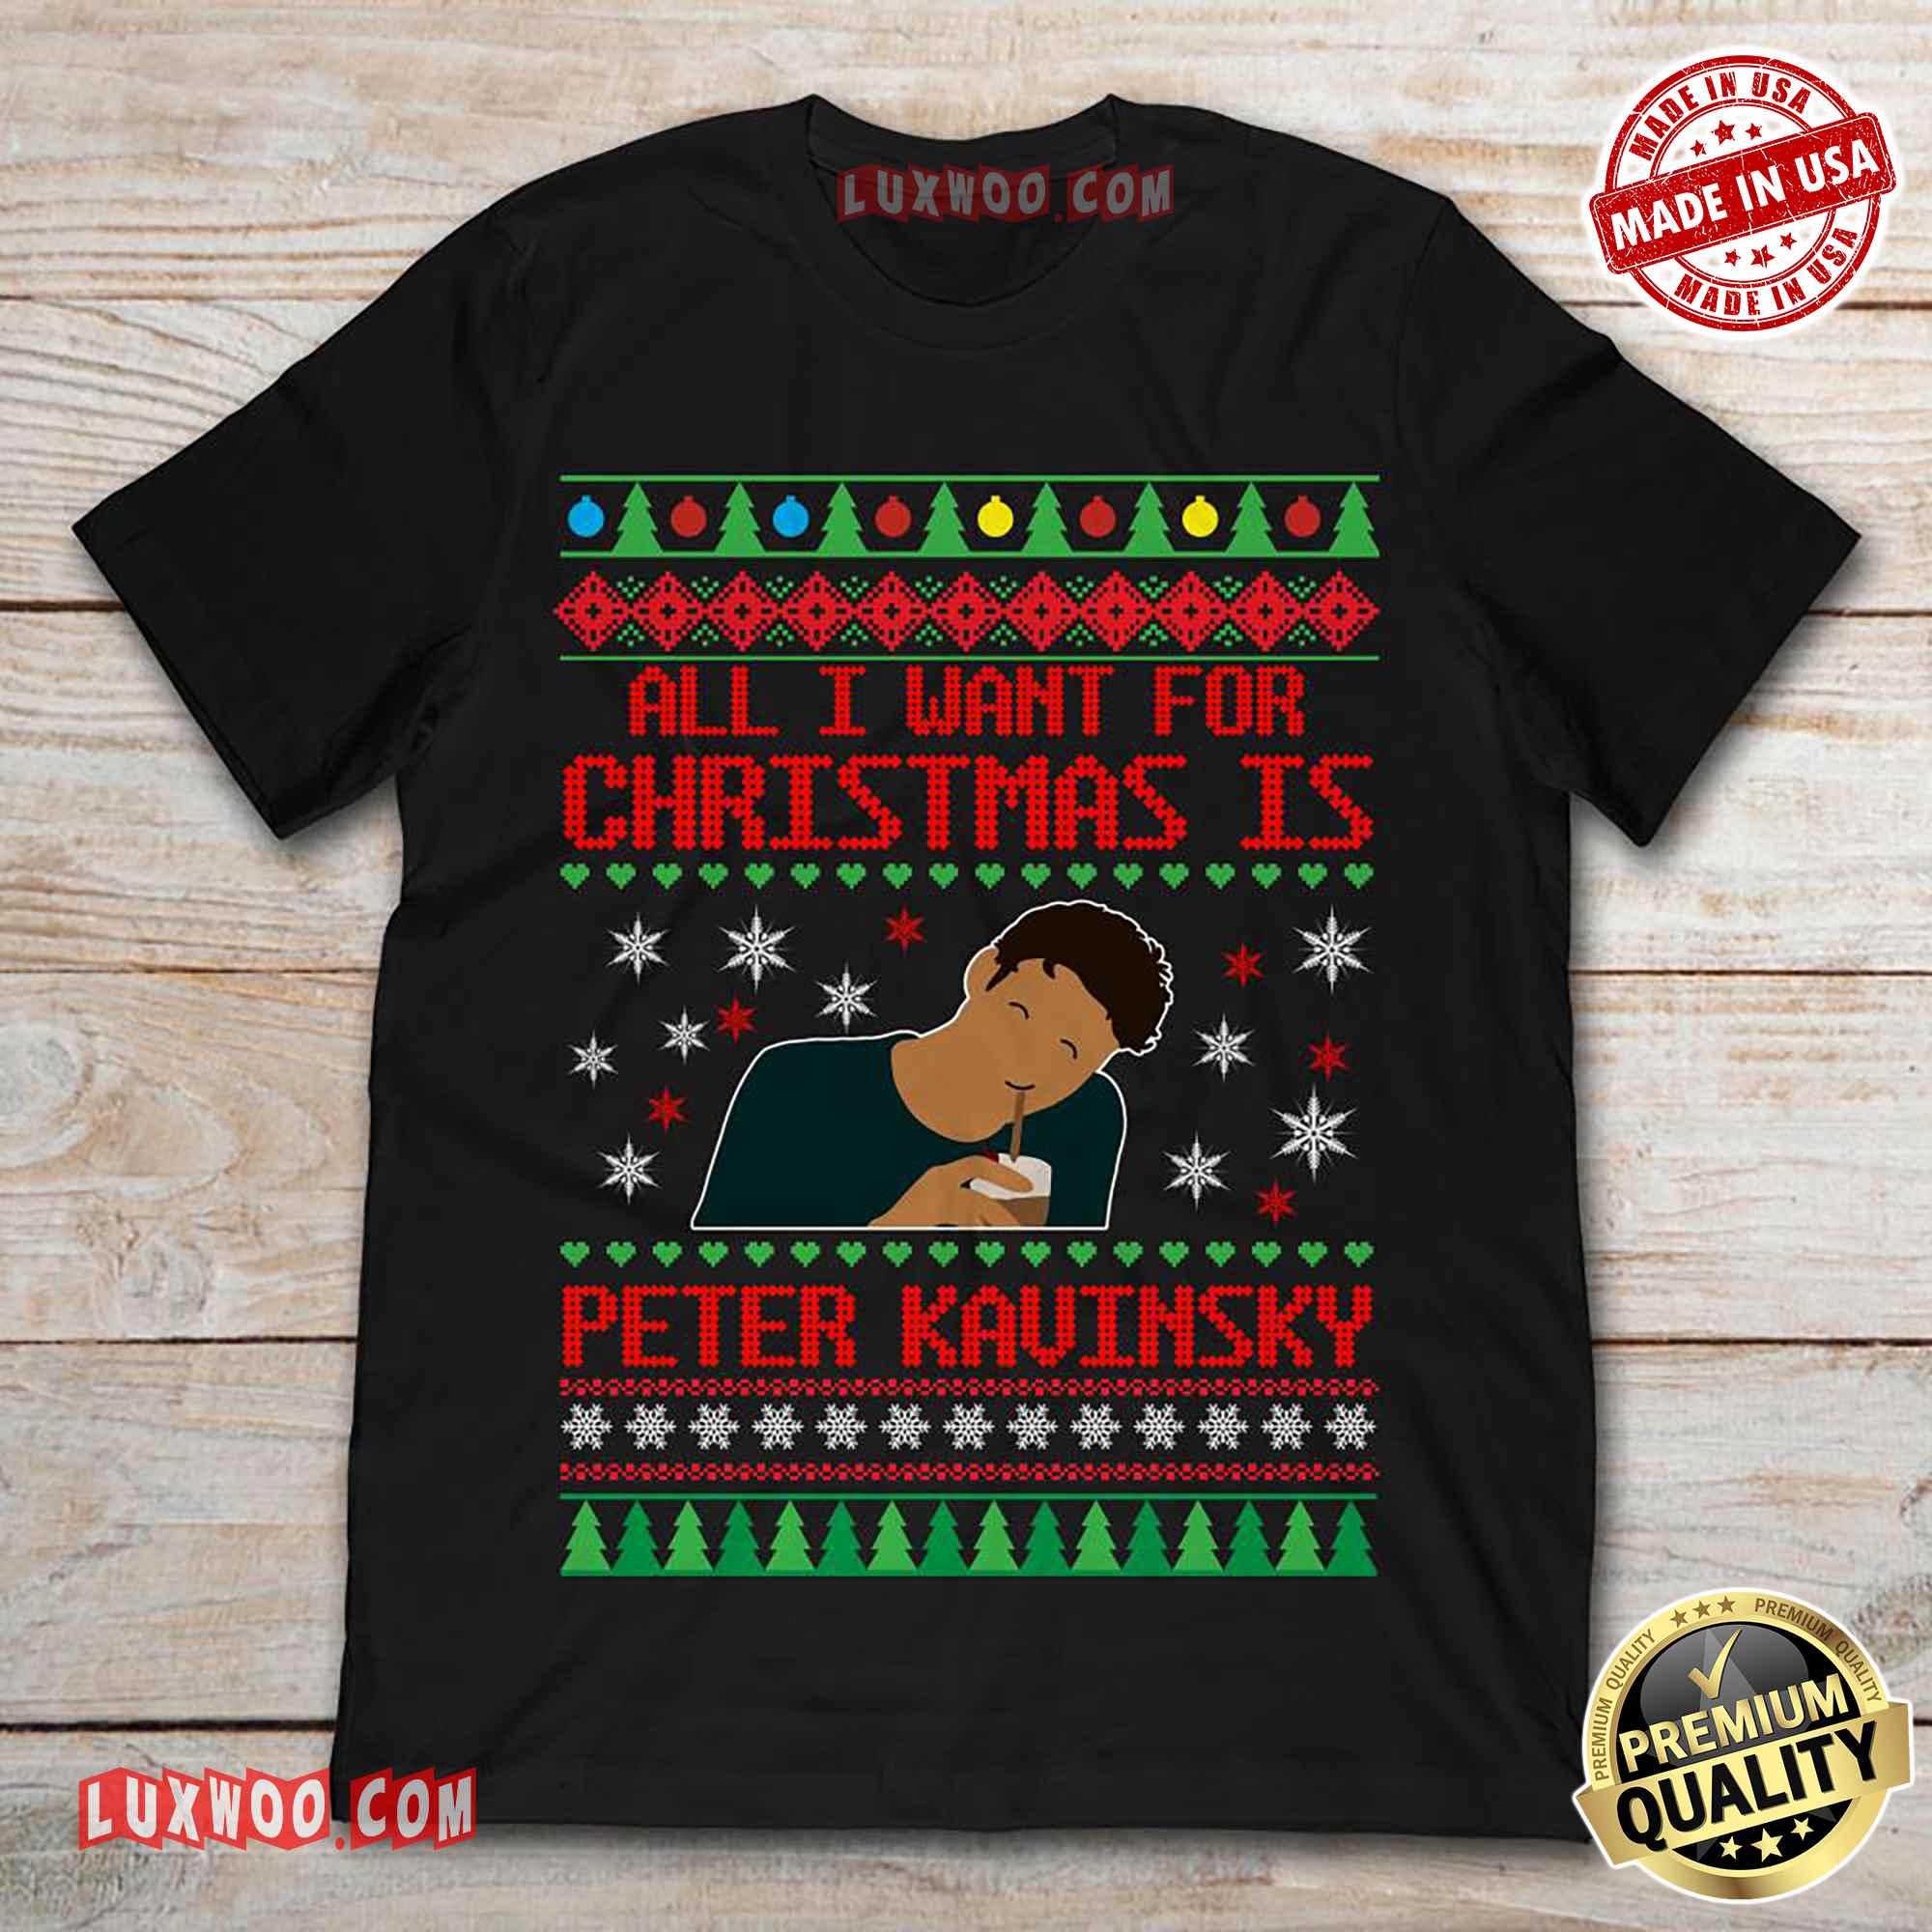 All I Want For Christmas Is Peter Kavinsky Tee Shirt - Luxwoo.com